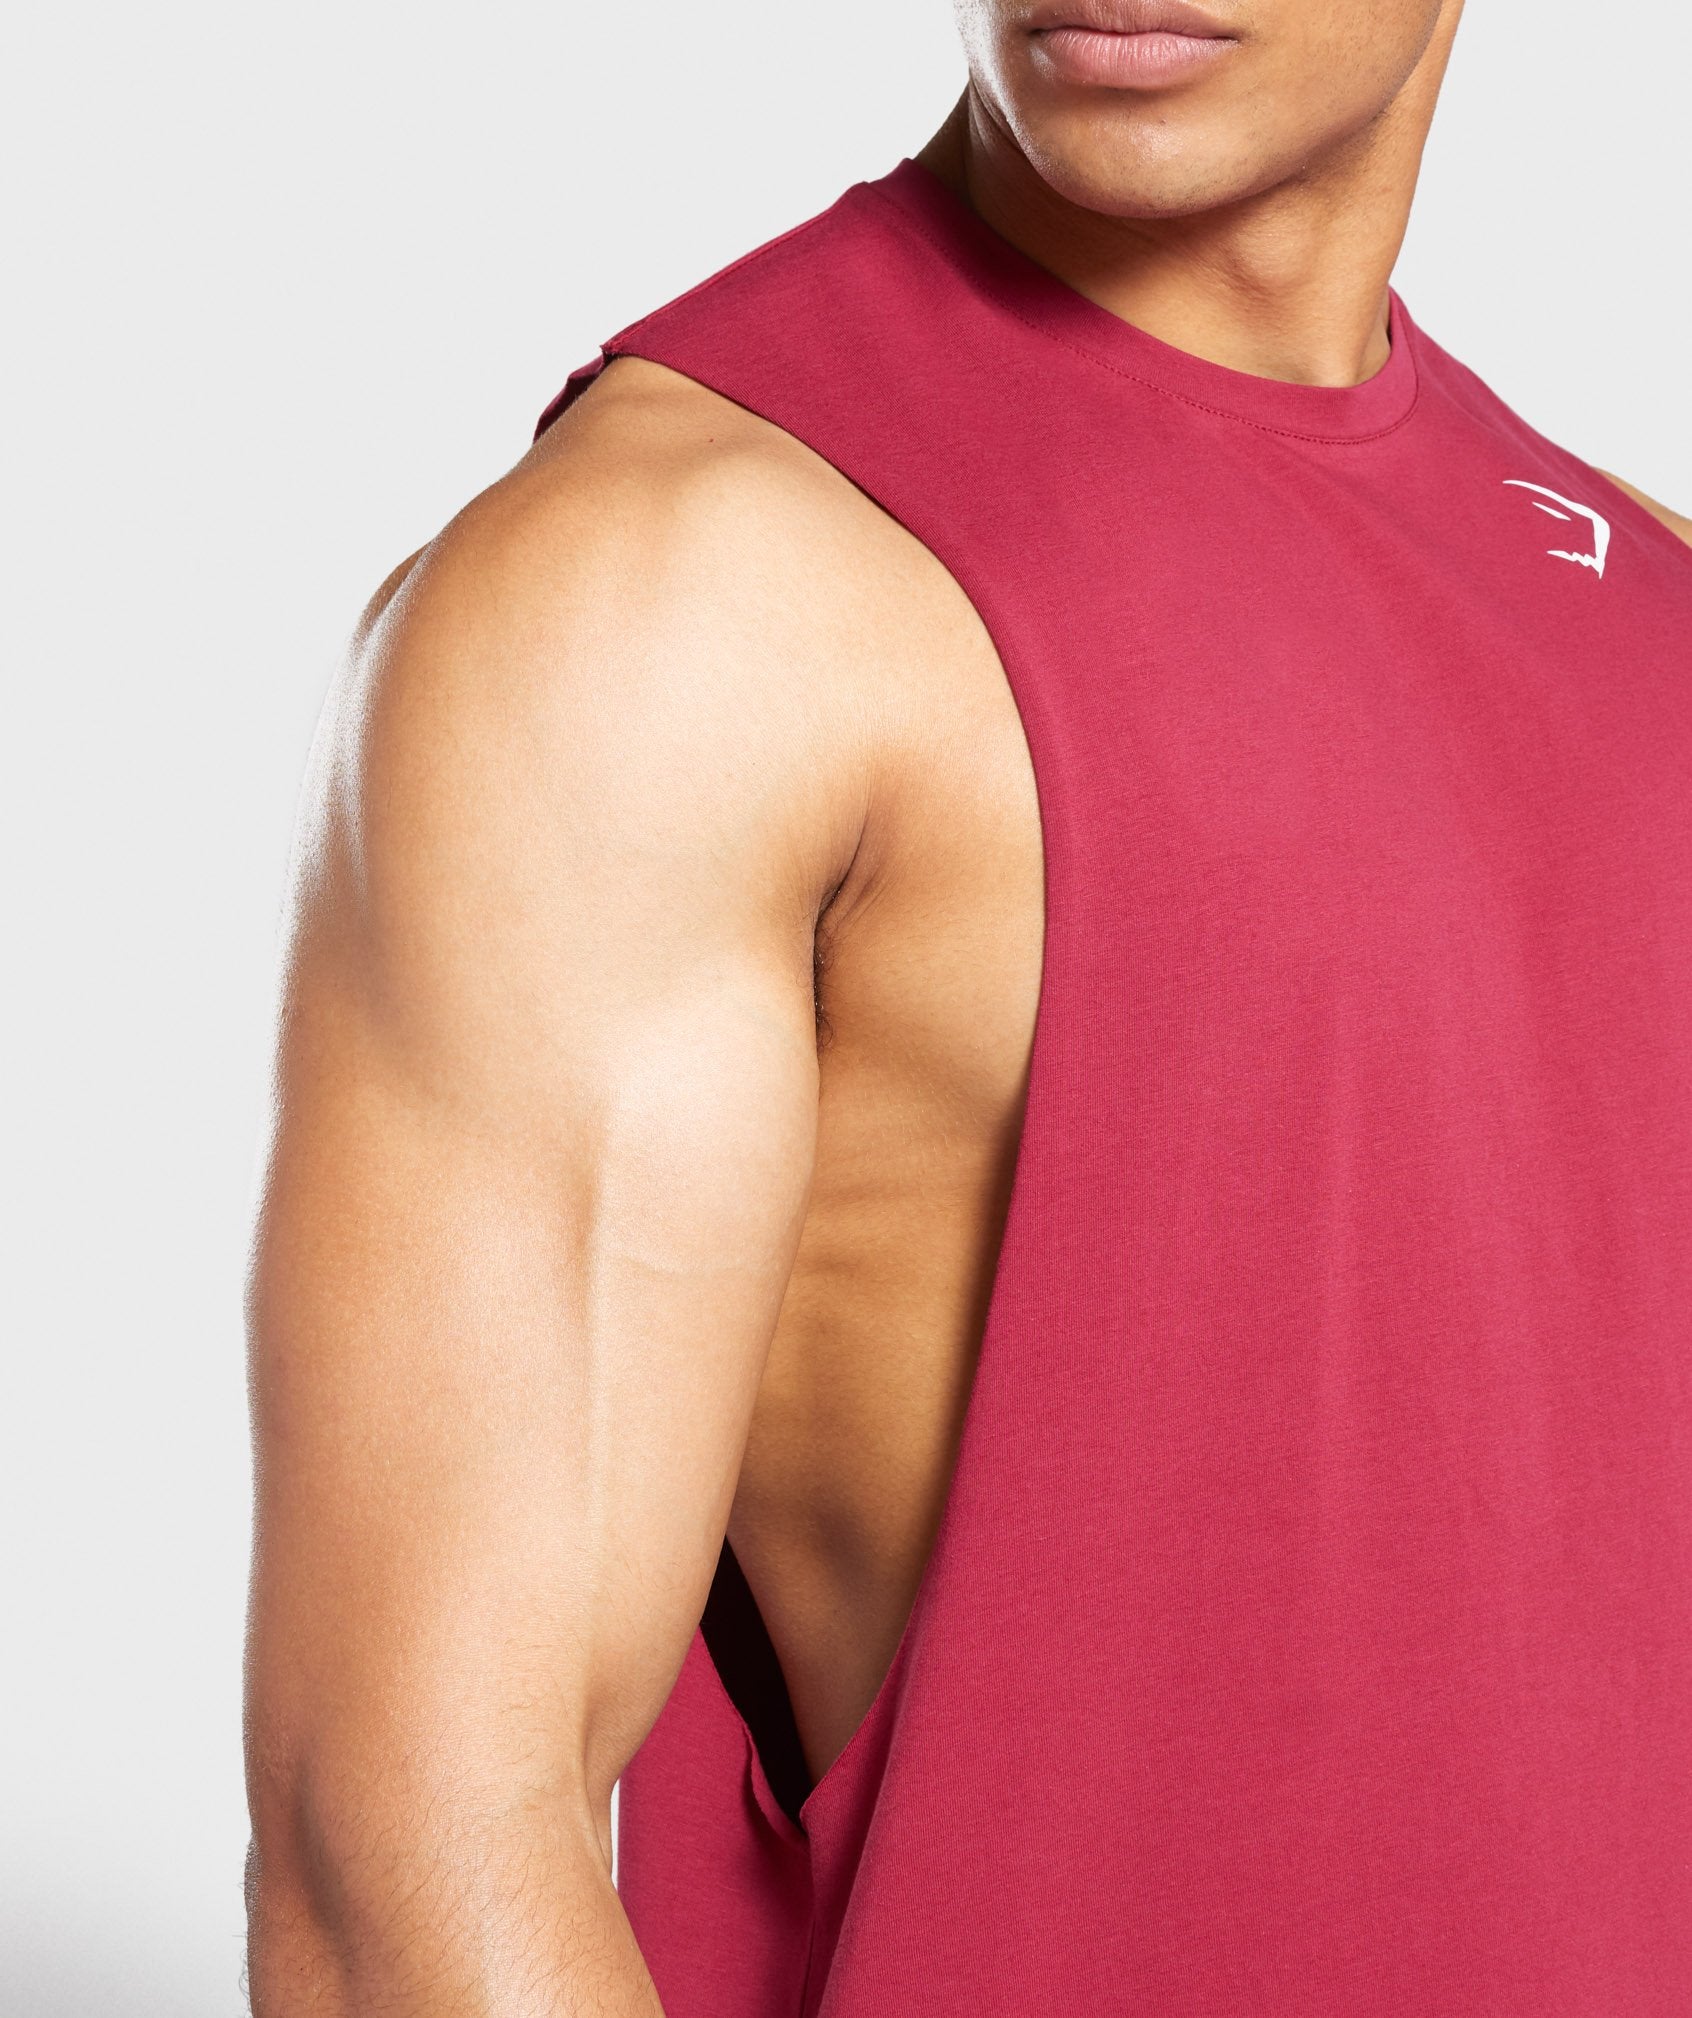 Critical Drop Armhole Tank in Claret - view 6